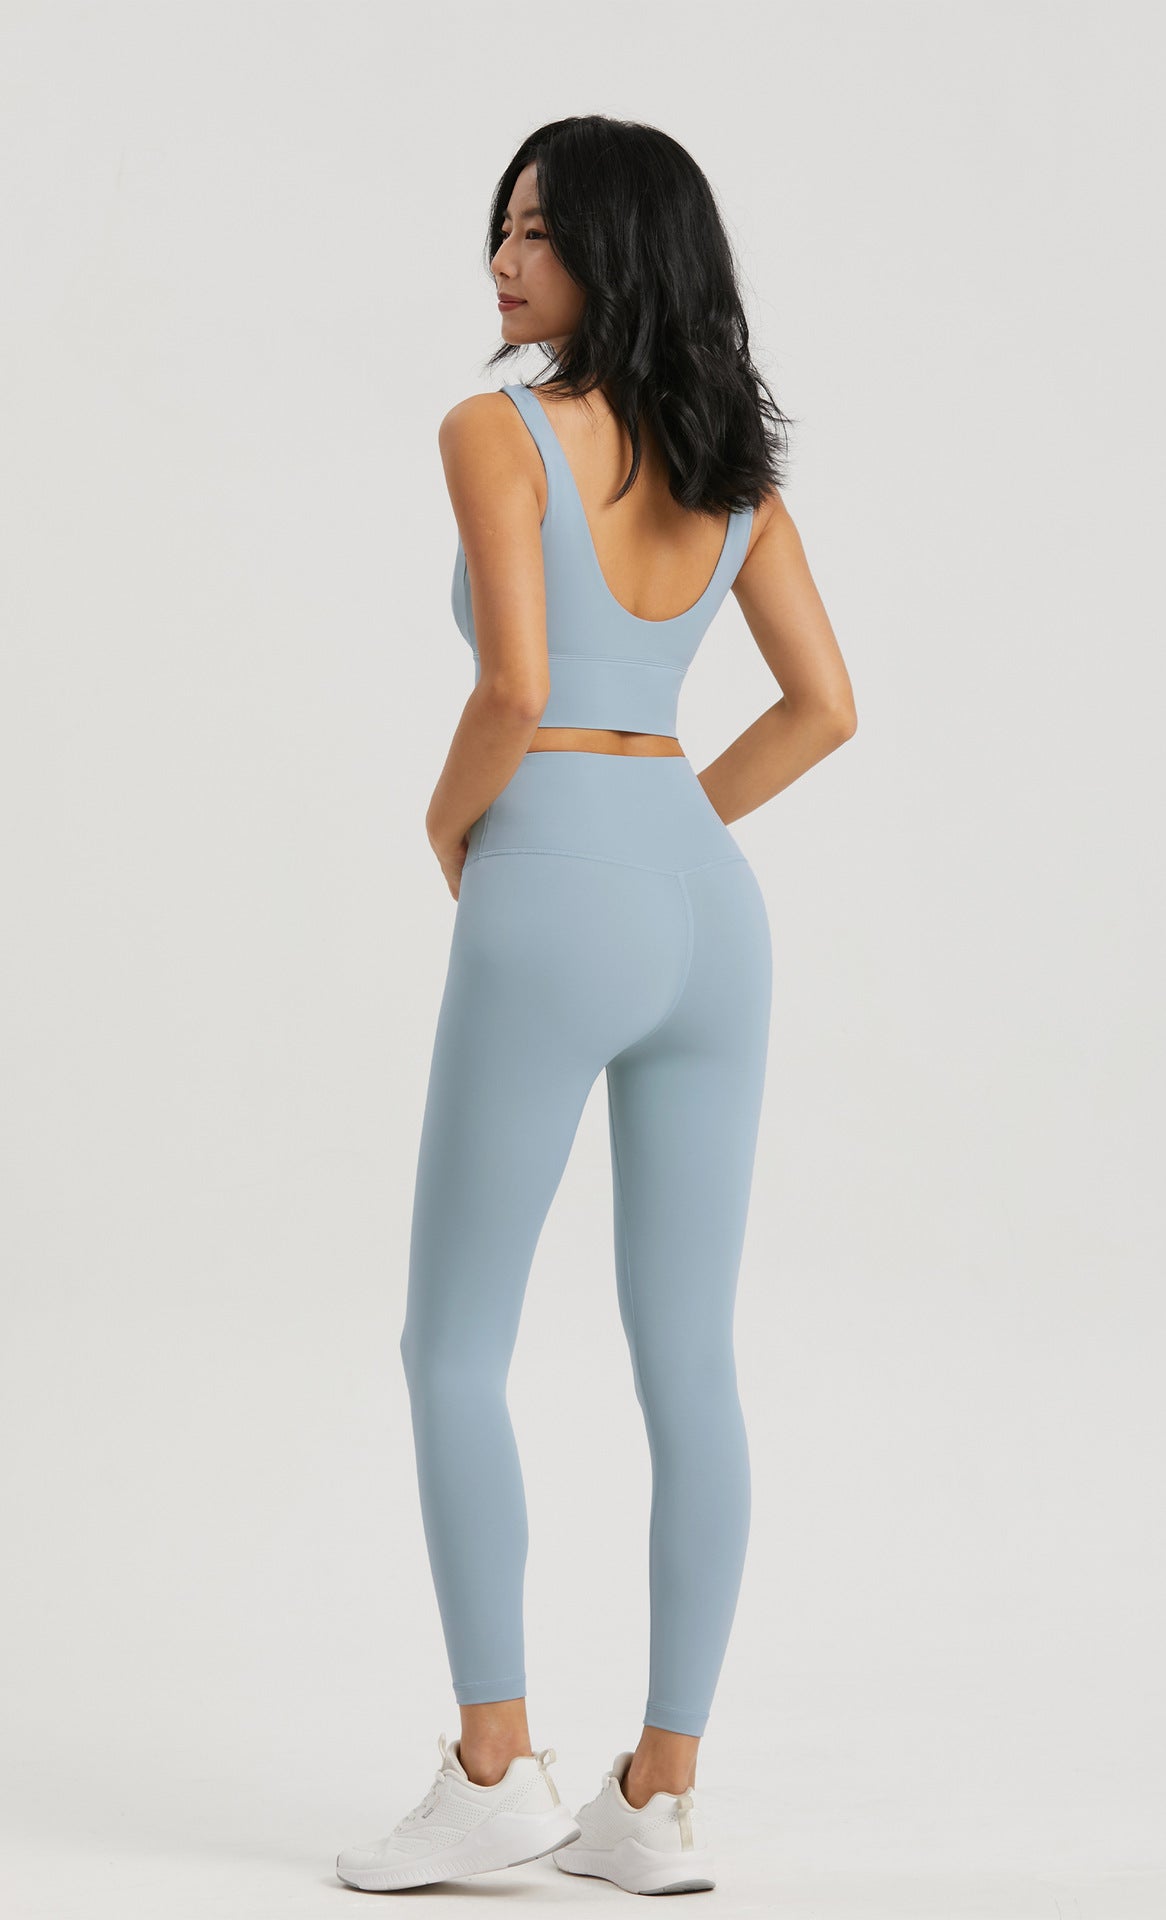 2023 spring and summer new no-embarrassment-free Lycra nude yoga pants anti-curling pocket peach fitness pants